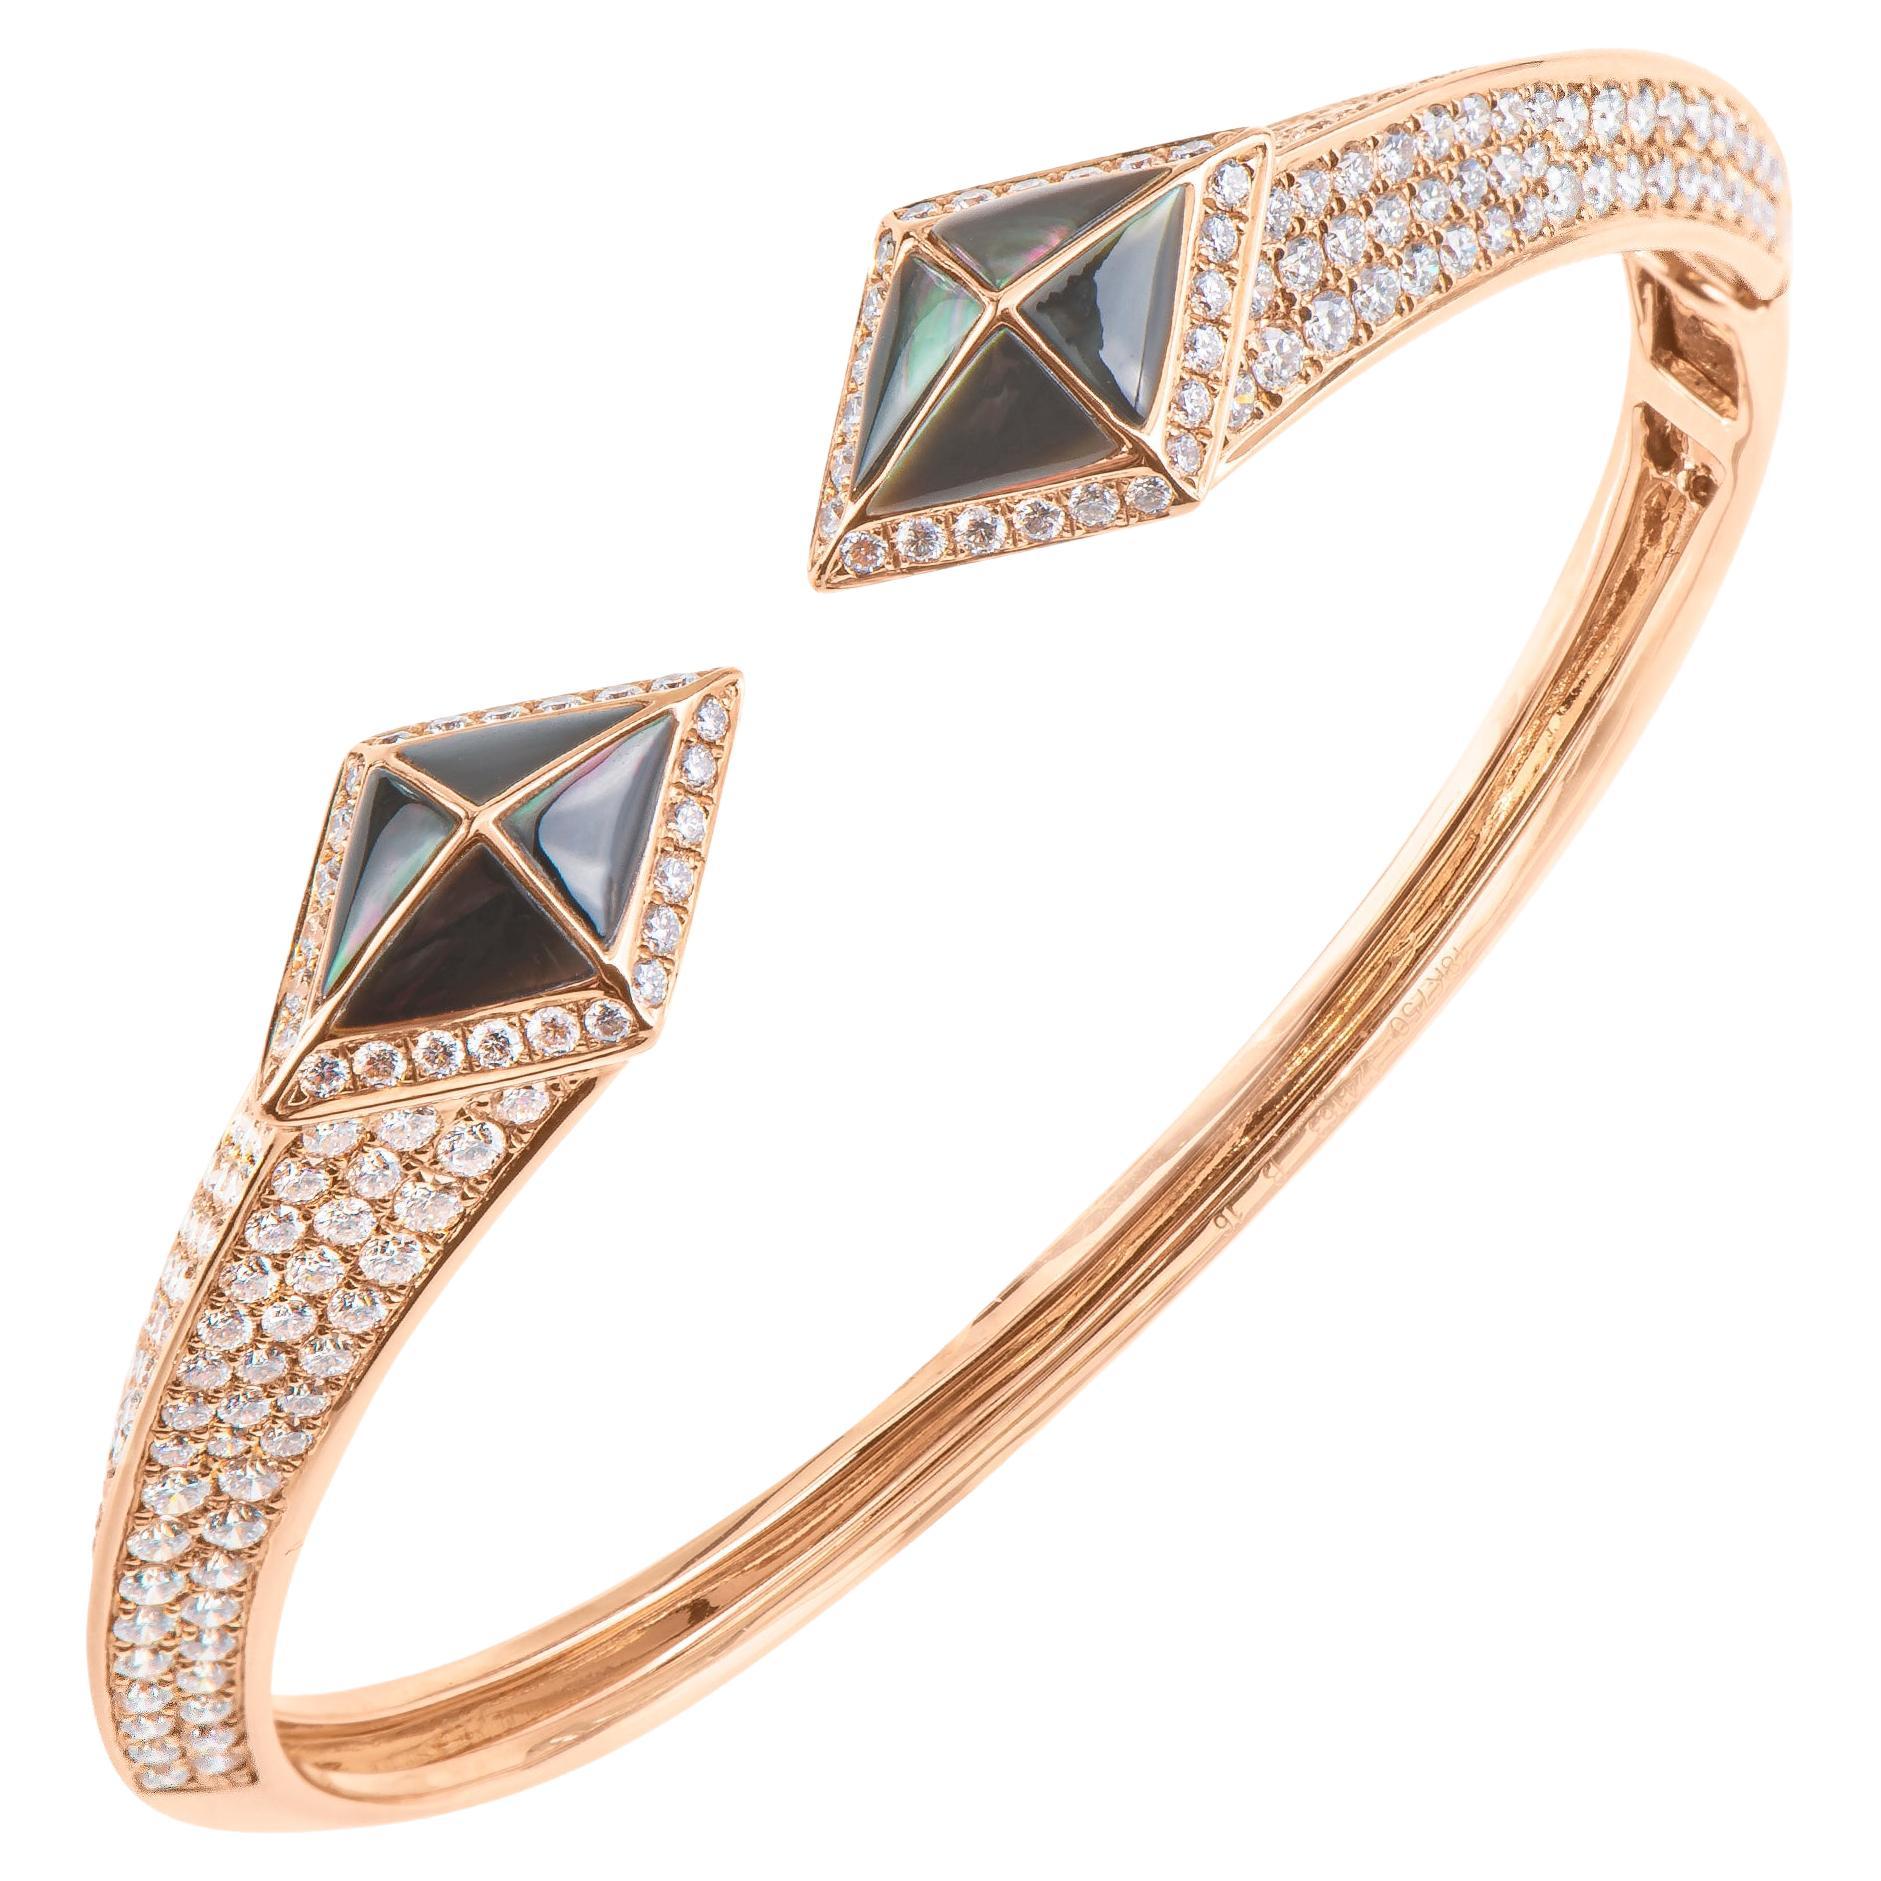 Tetra Hydra Bangle with Grey Mother of Pearl and Diamonds in 18k Rose Gold